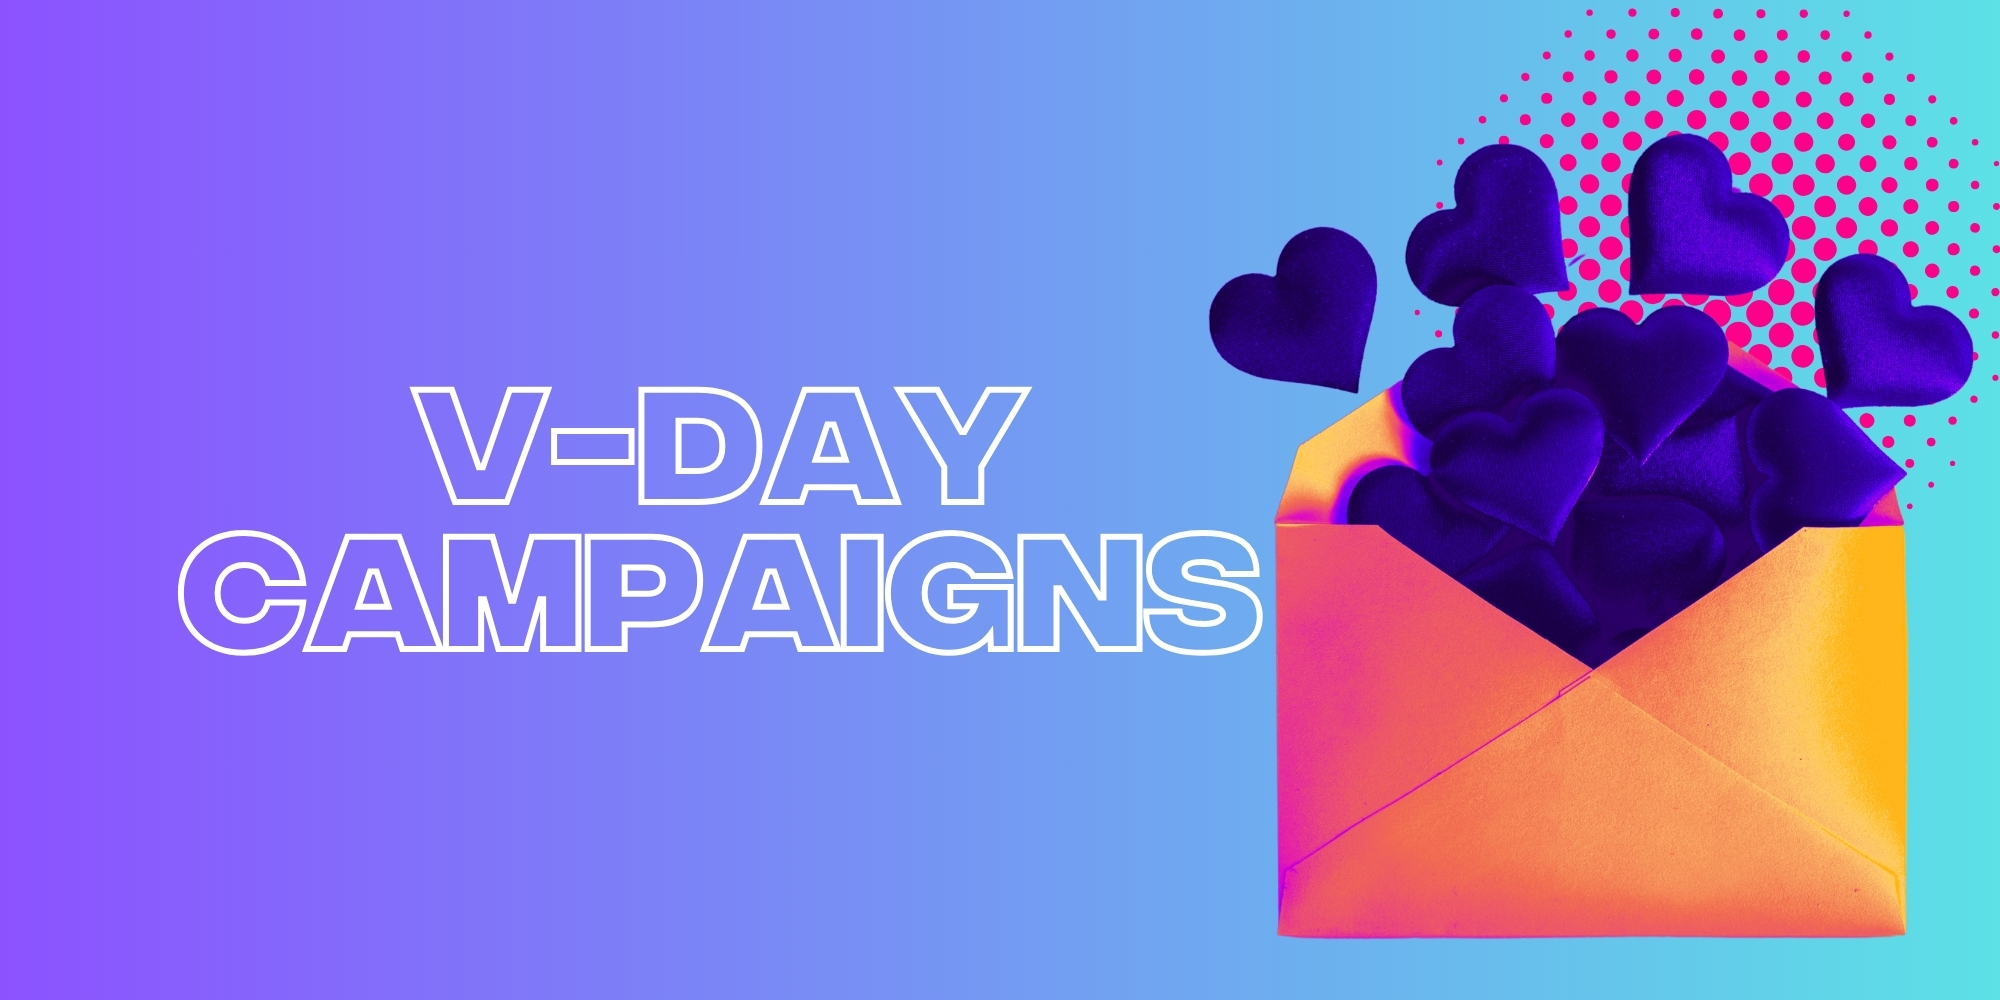 The Best Valentine’s Day Campaigns To Come Out Of Social Media